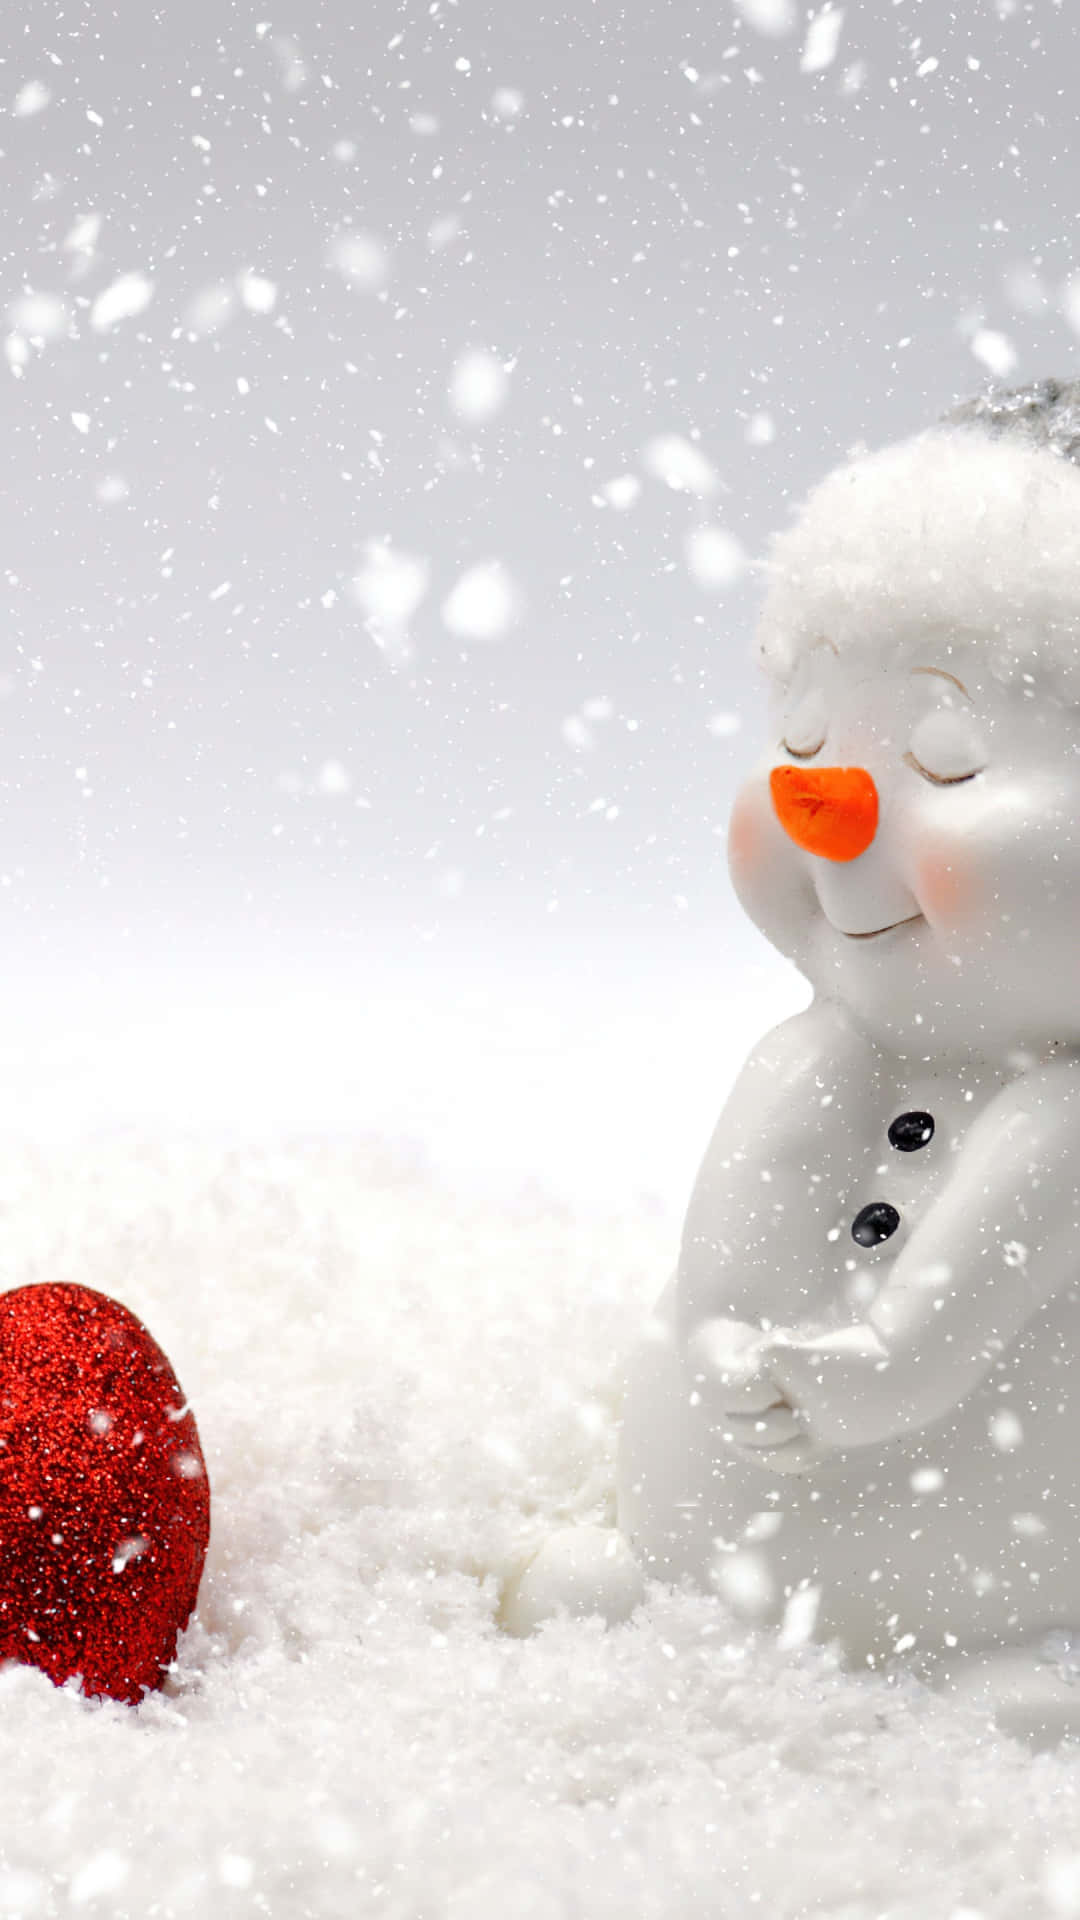 Cheerful_ Snowman_with_ Red_ Ornament.jpg Wallpaper